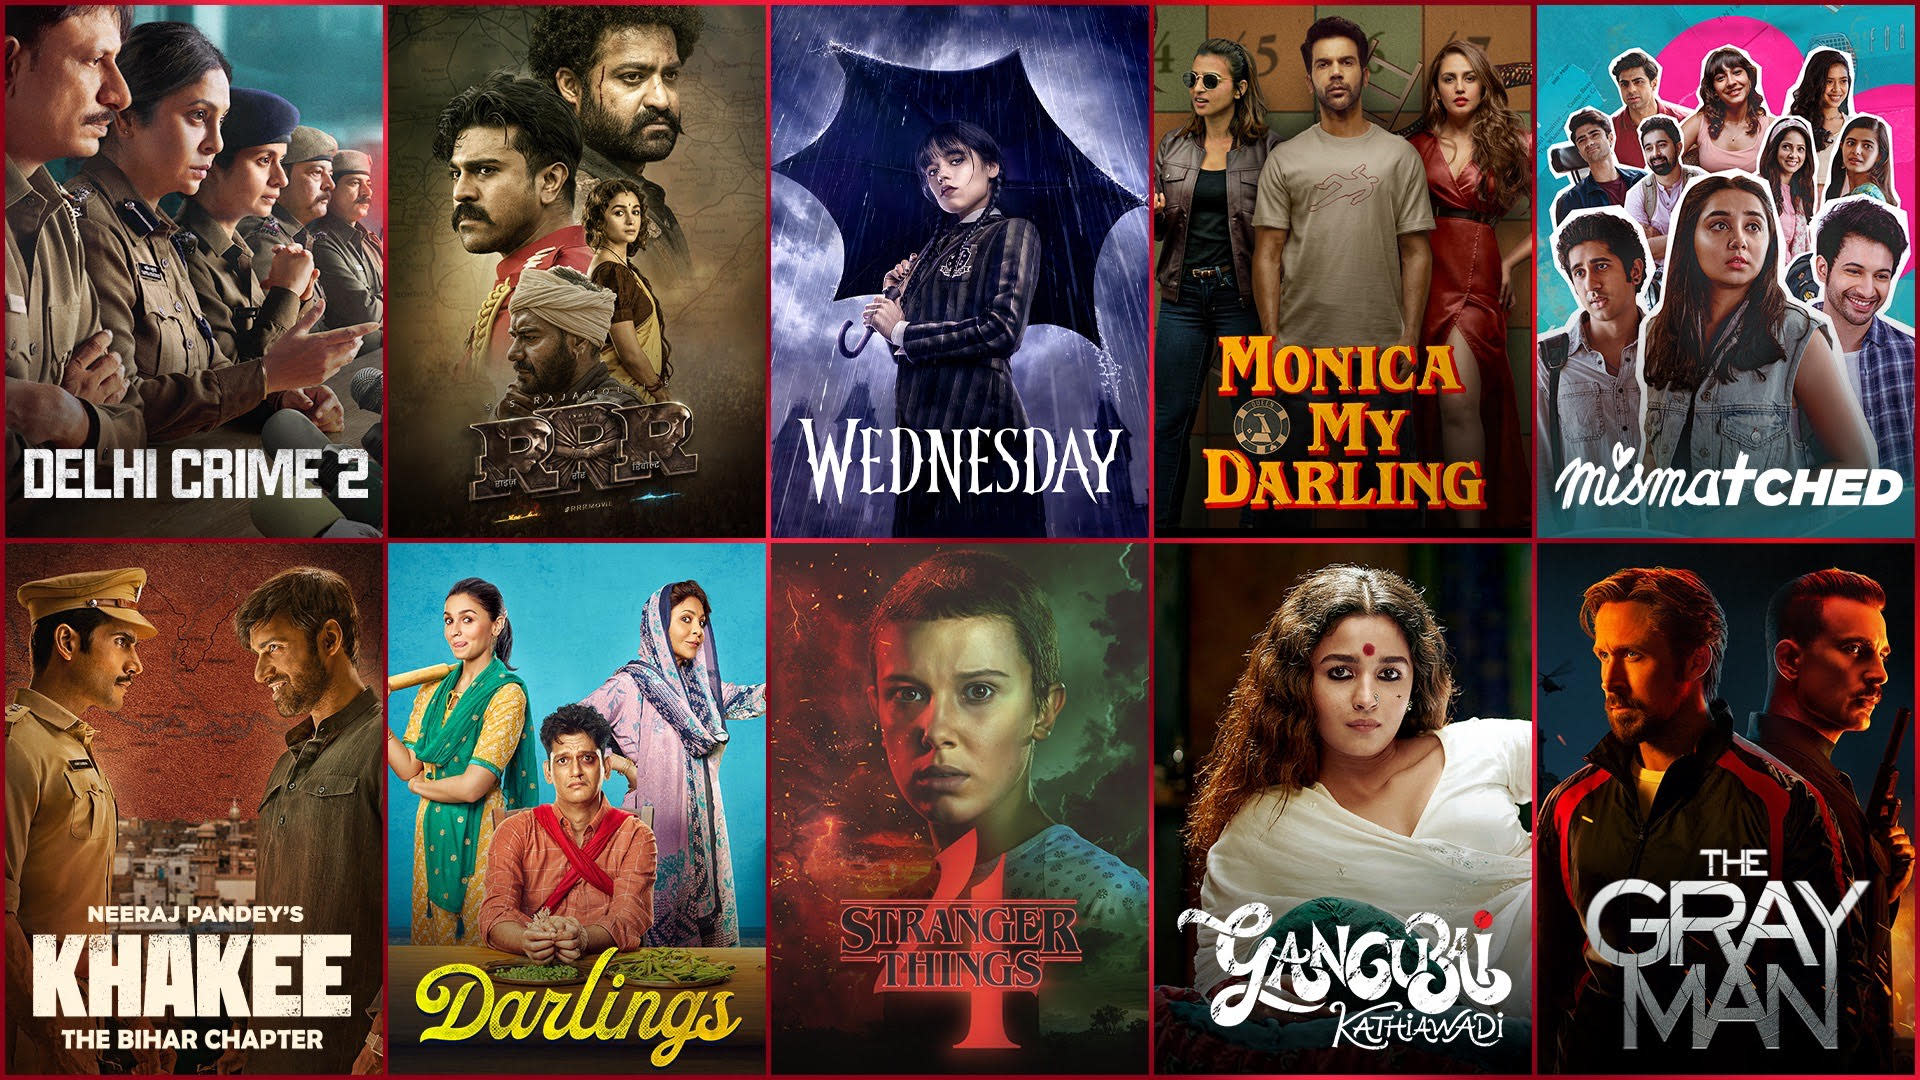 Darlings, What a Year! - About Netflix